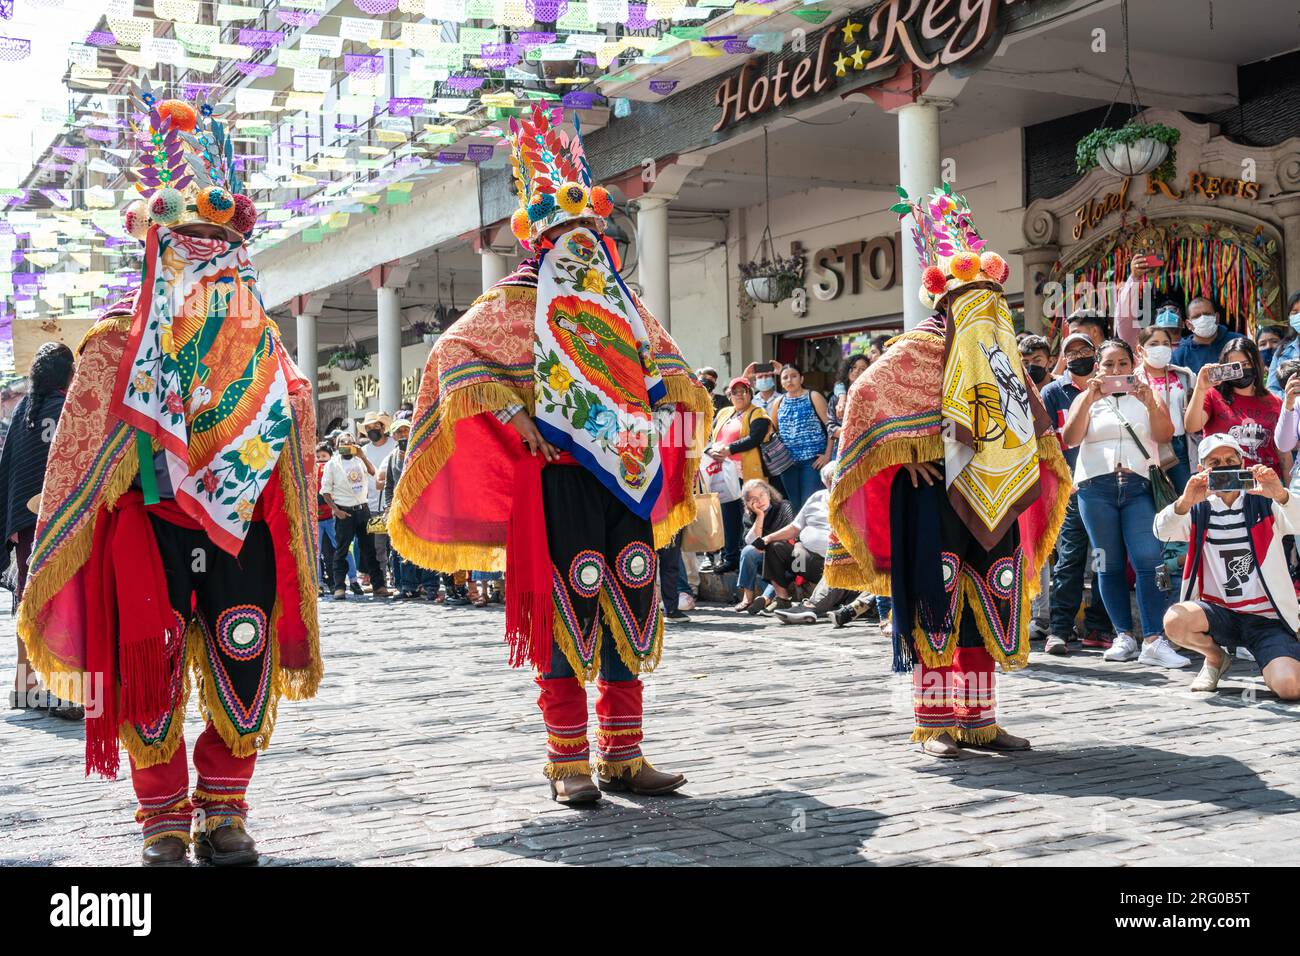 Mexican costumed dancers perform the La Danza de los Moros or Dance of the Moors at the start of the Palm Sunday Handcraft Market or Tianguis de Domingo de Ramos April 9, 2022 in Uruapan, Michoacan, Mexico. The week long handicraft market is considered the largest in the Americas. Stock Photo